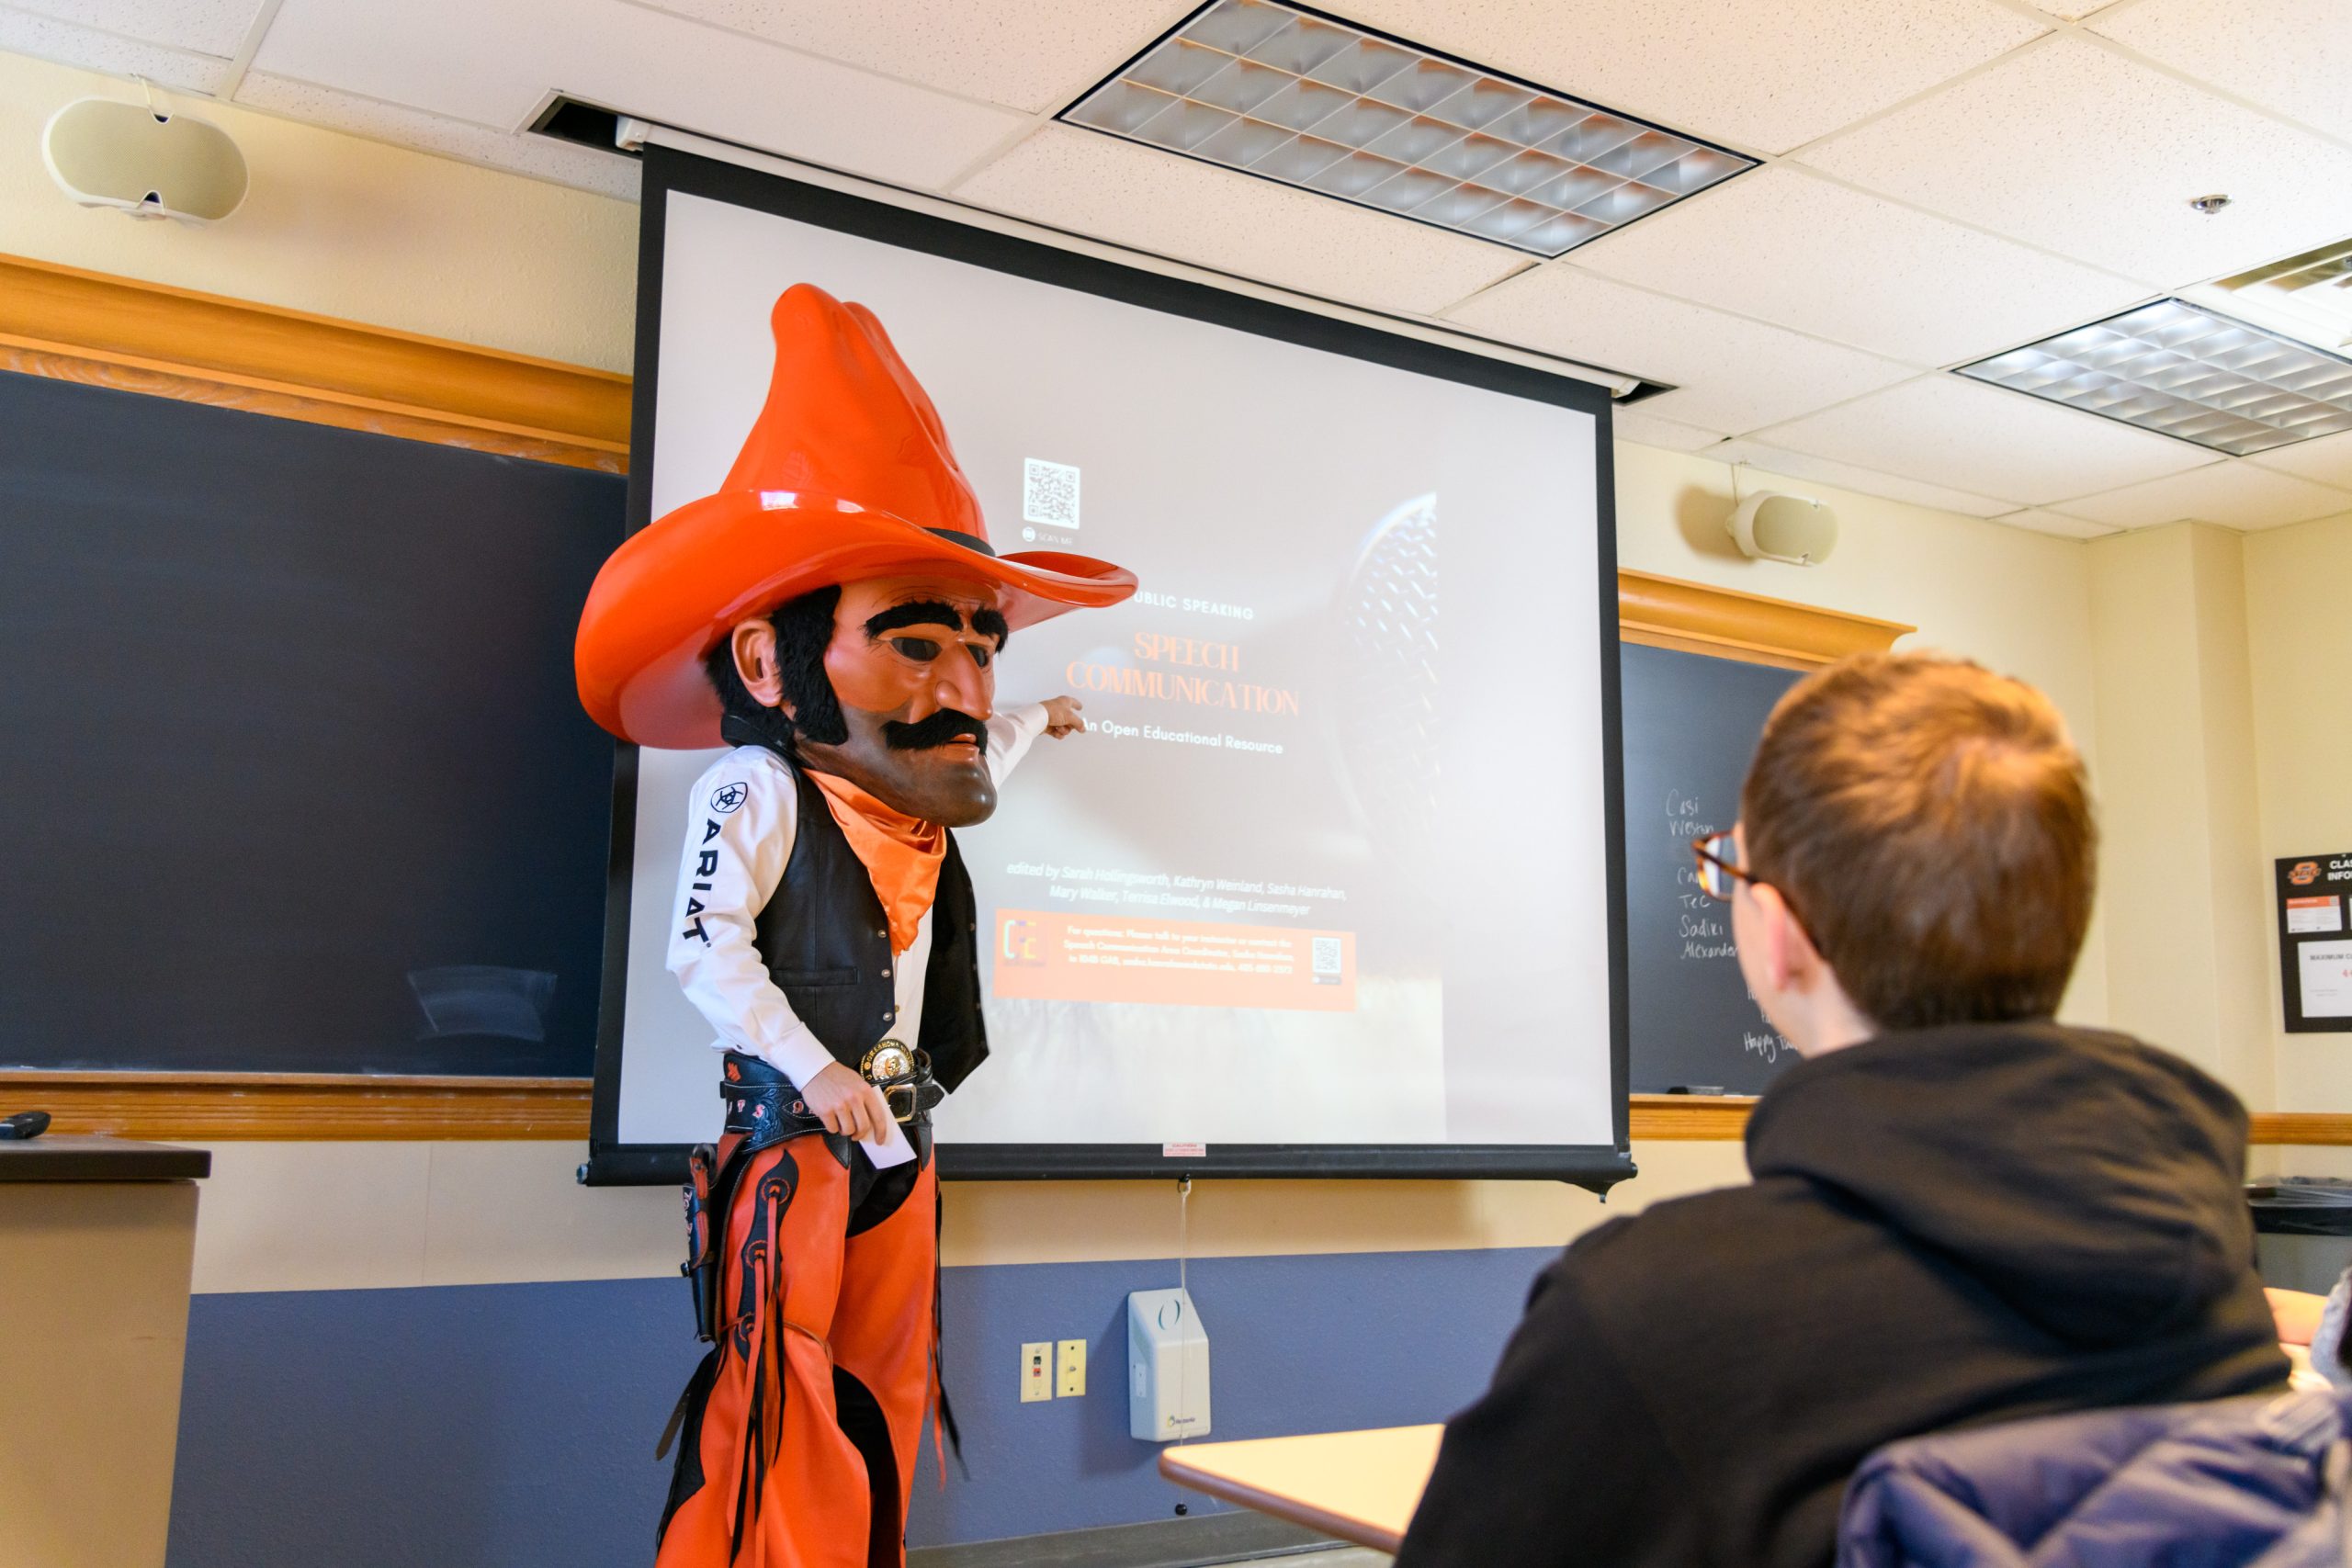 Pistol Pete is explaining to students about the speech communication minor and pointing to the projector